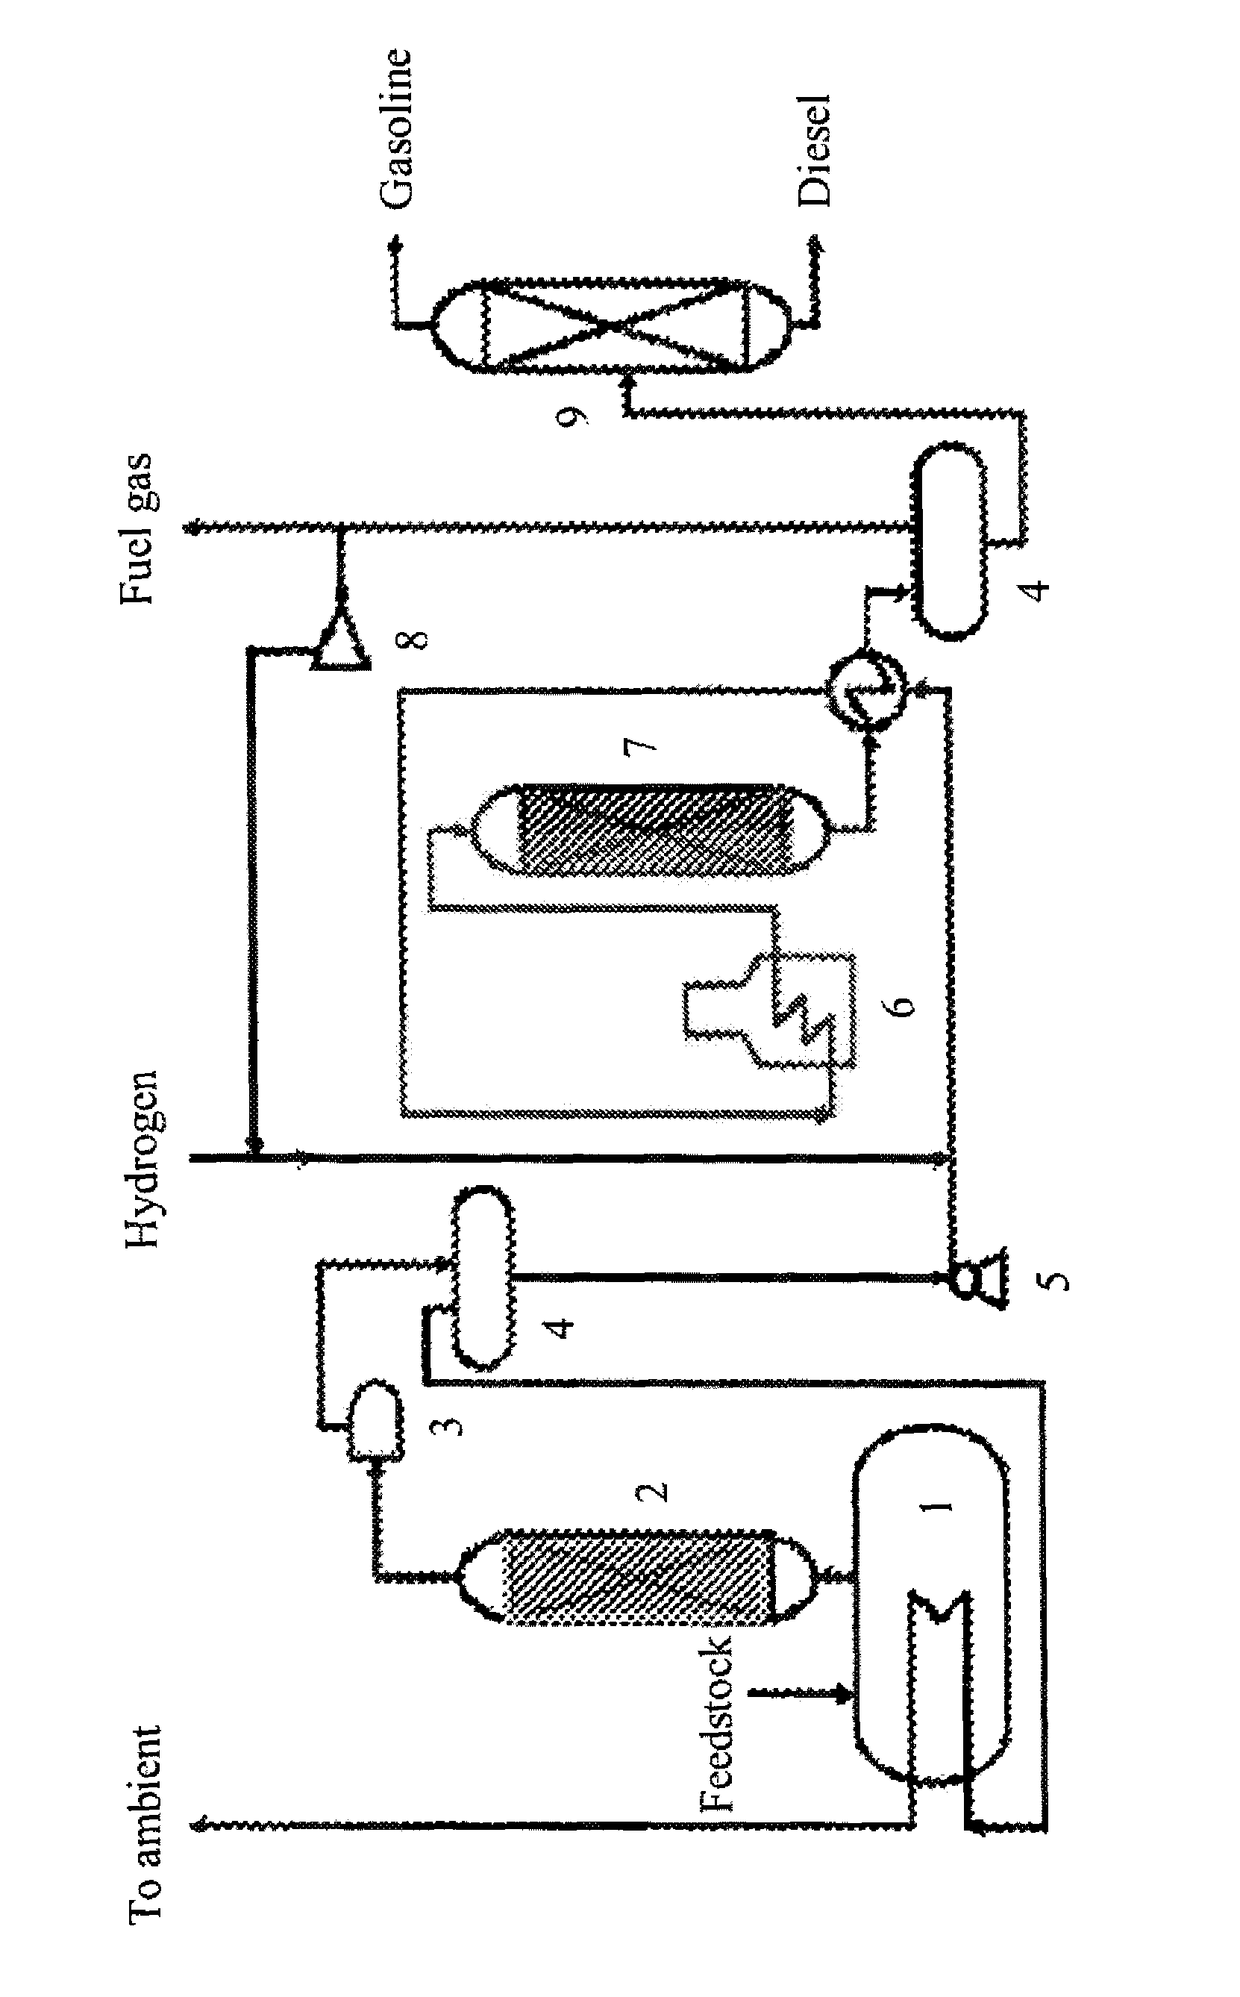 Method for preparing fuel by using biological oils and fats